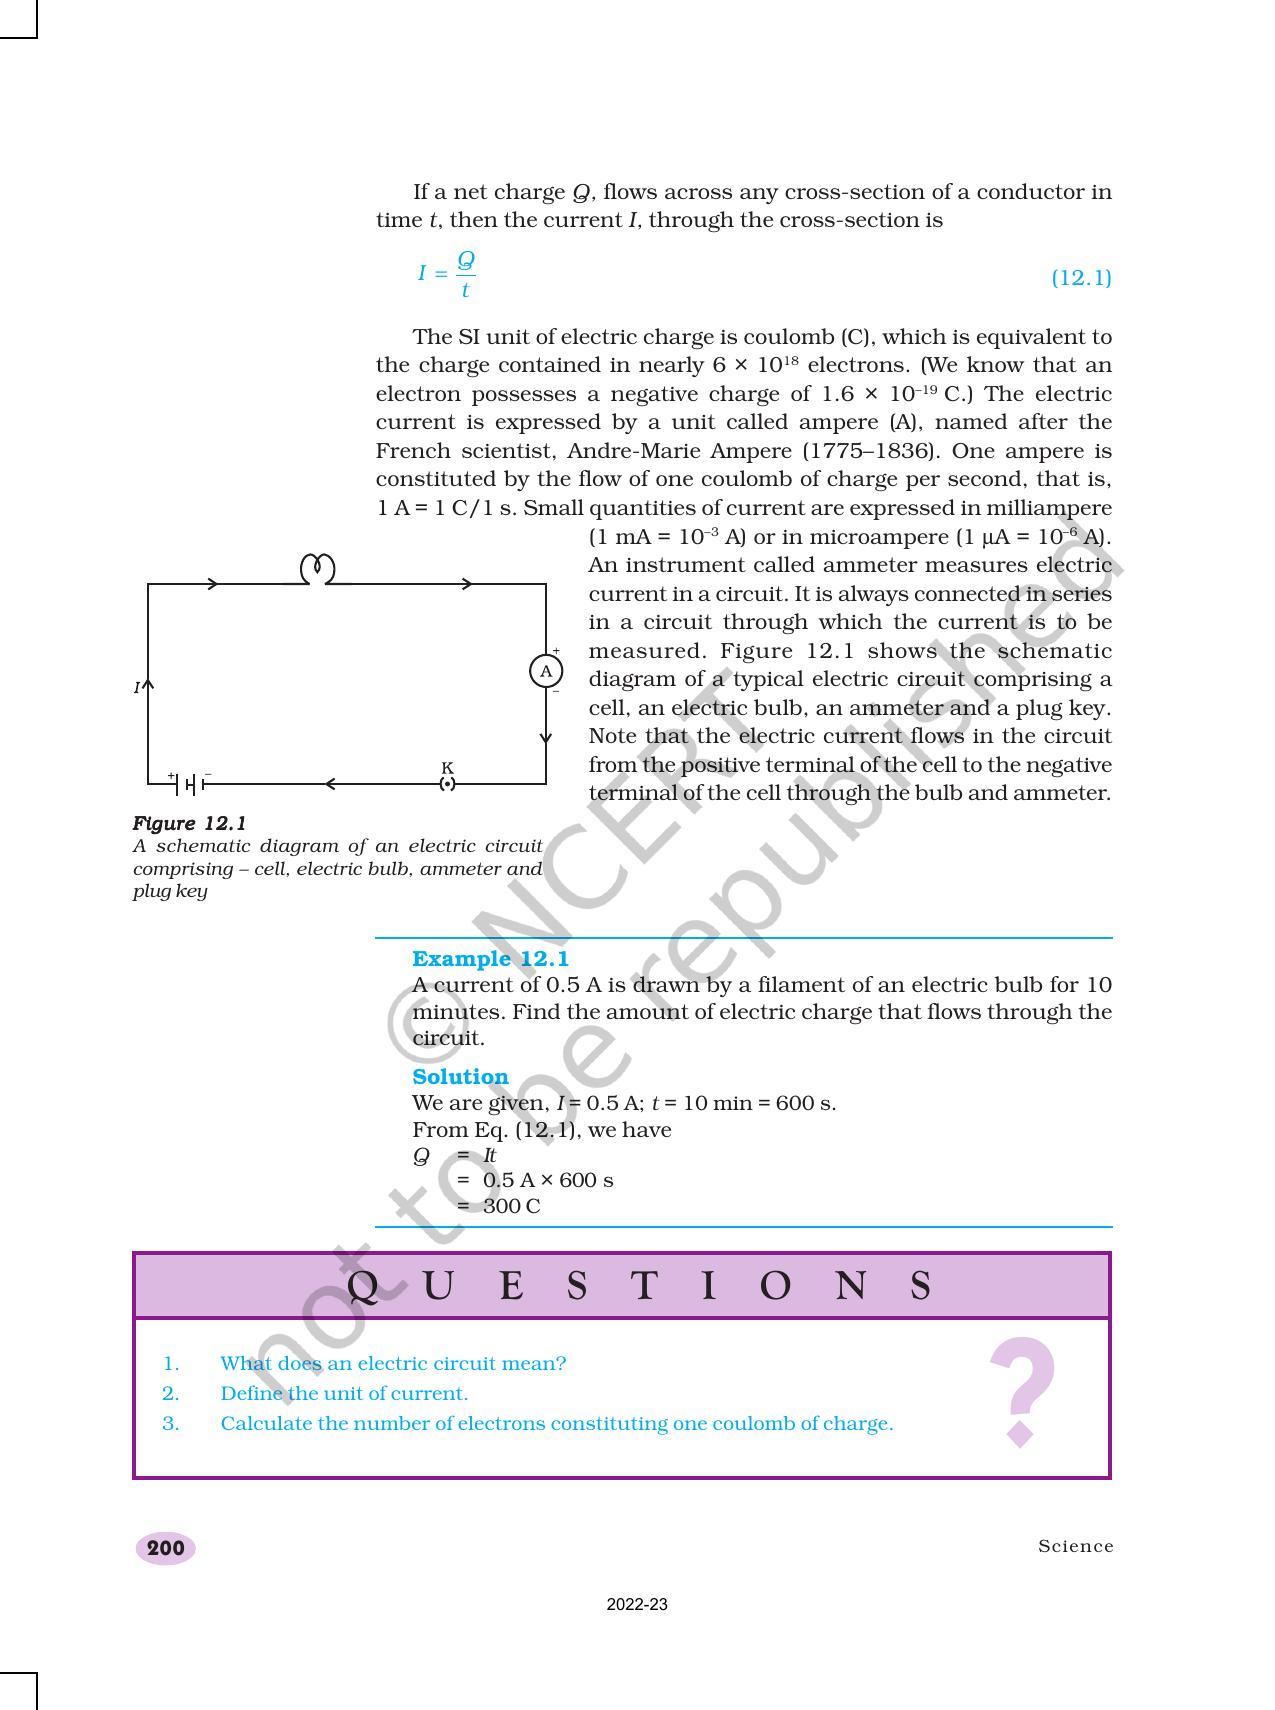 NCERT Book for Class 10 Science Chapter 12 Electricity - Page 2